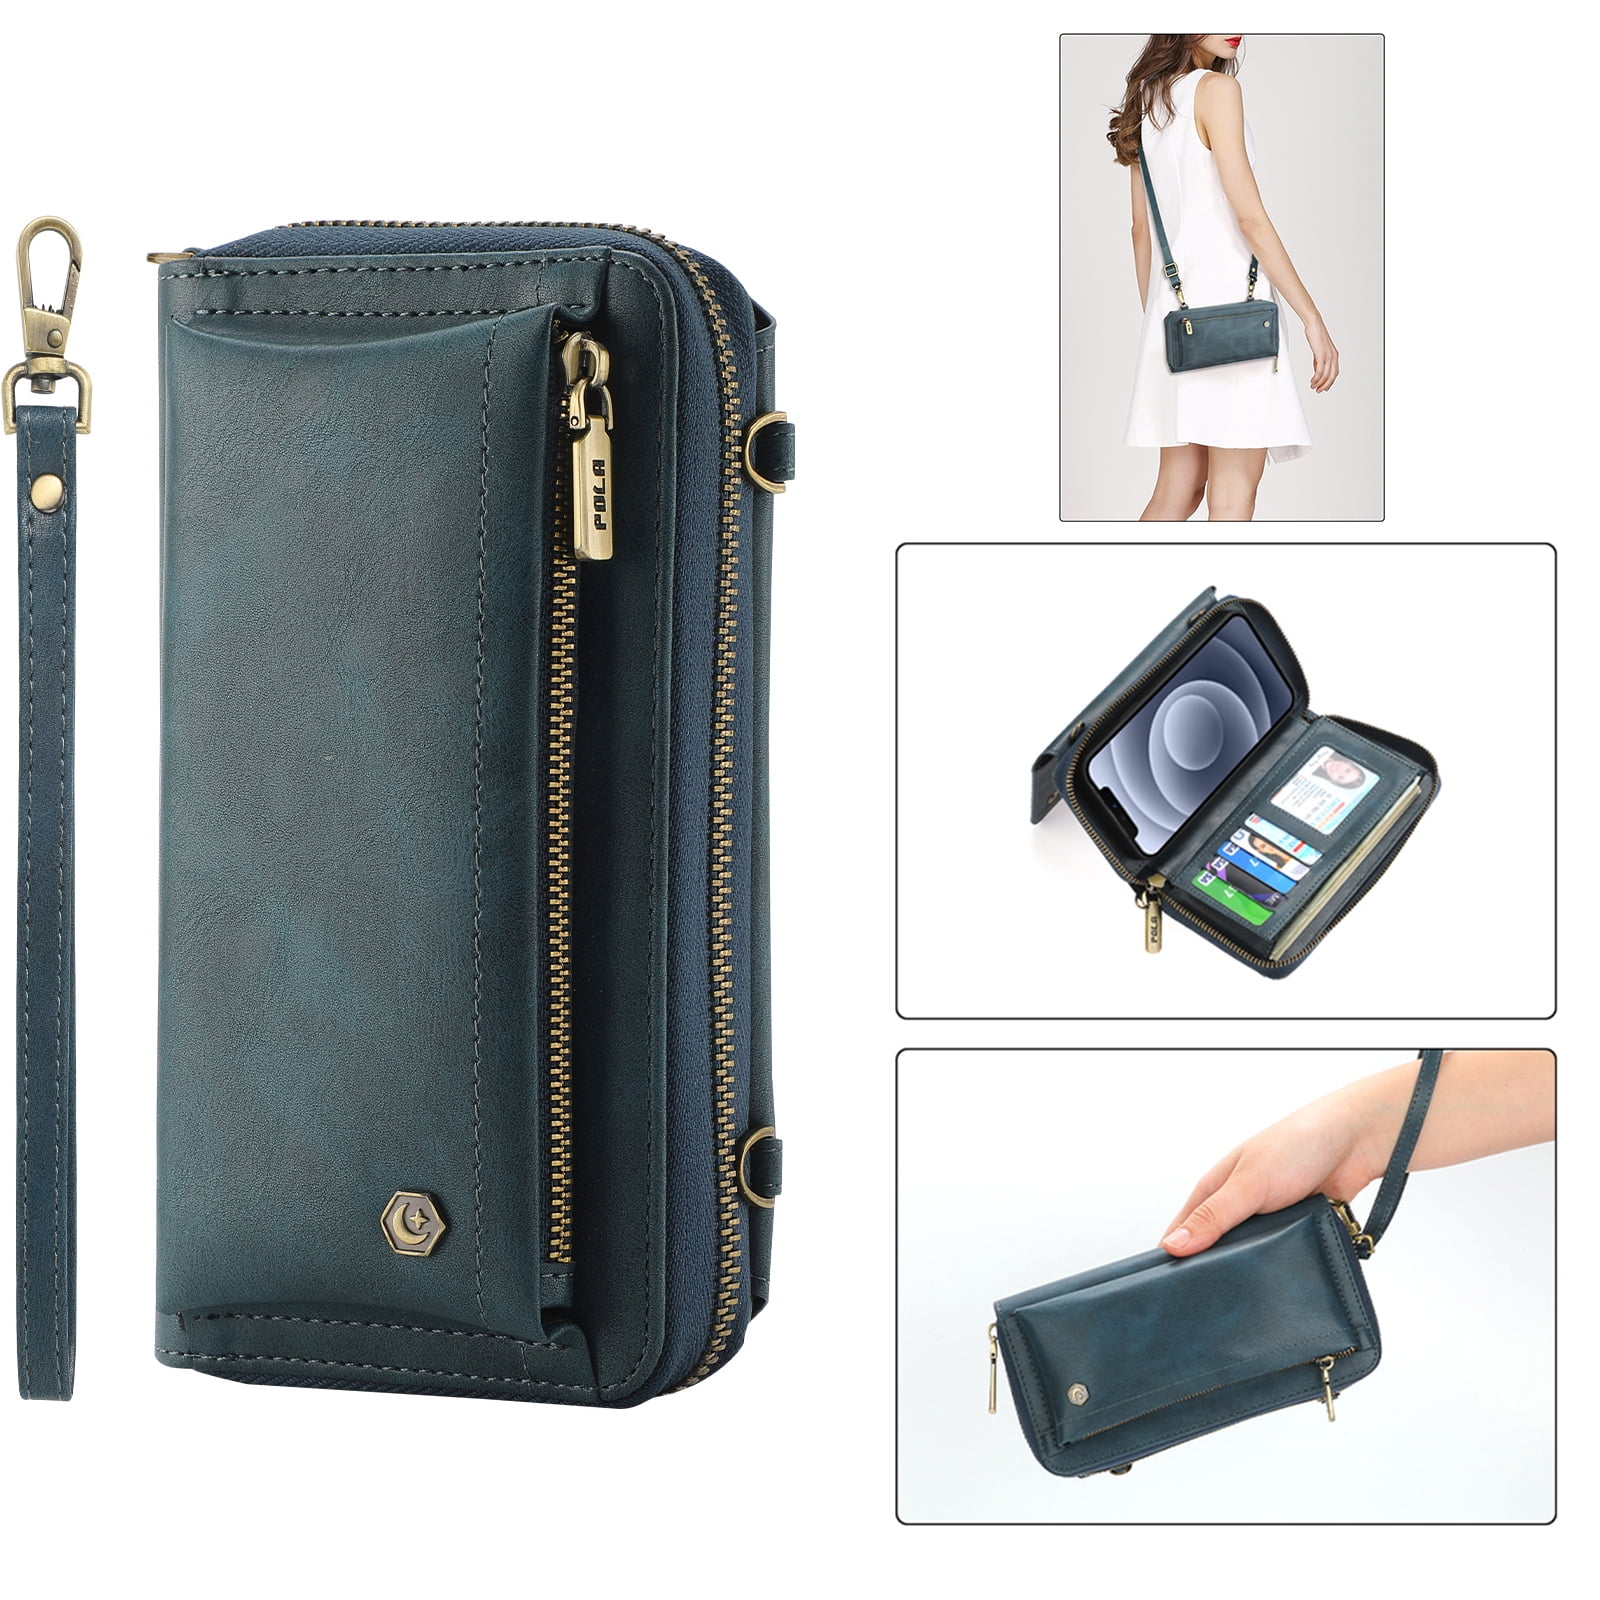 Jaorty PU Leather Wallet Case for iPhone Xs Max Necklace Lanyard Case Cover with Card Holder Adjustable Detachable Anti-Lost Neck Strap for Apple iPhone Xs Max,Blue 